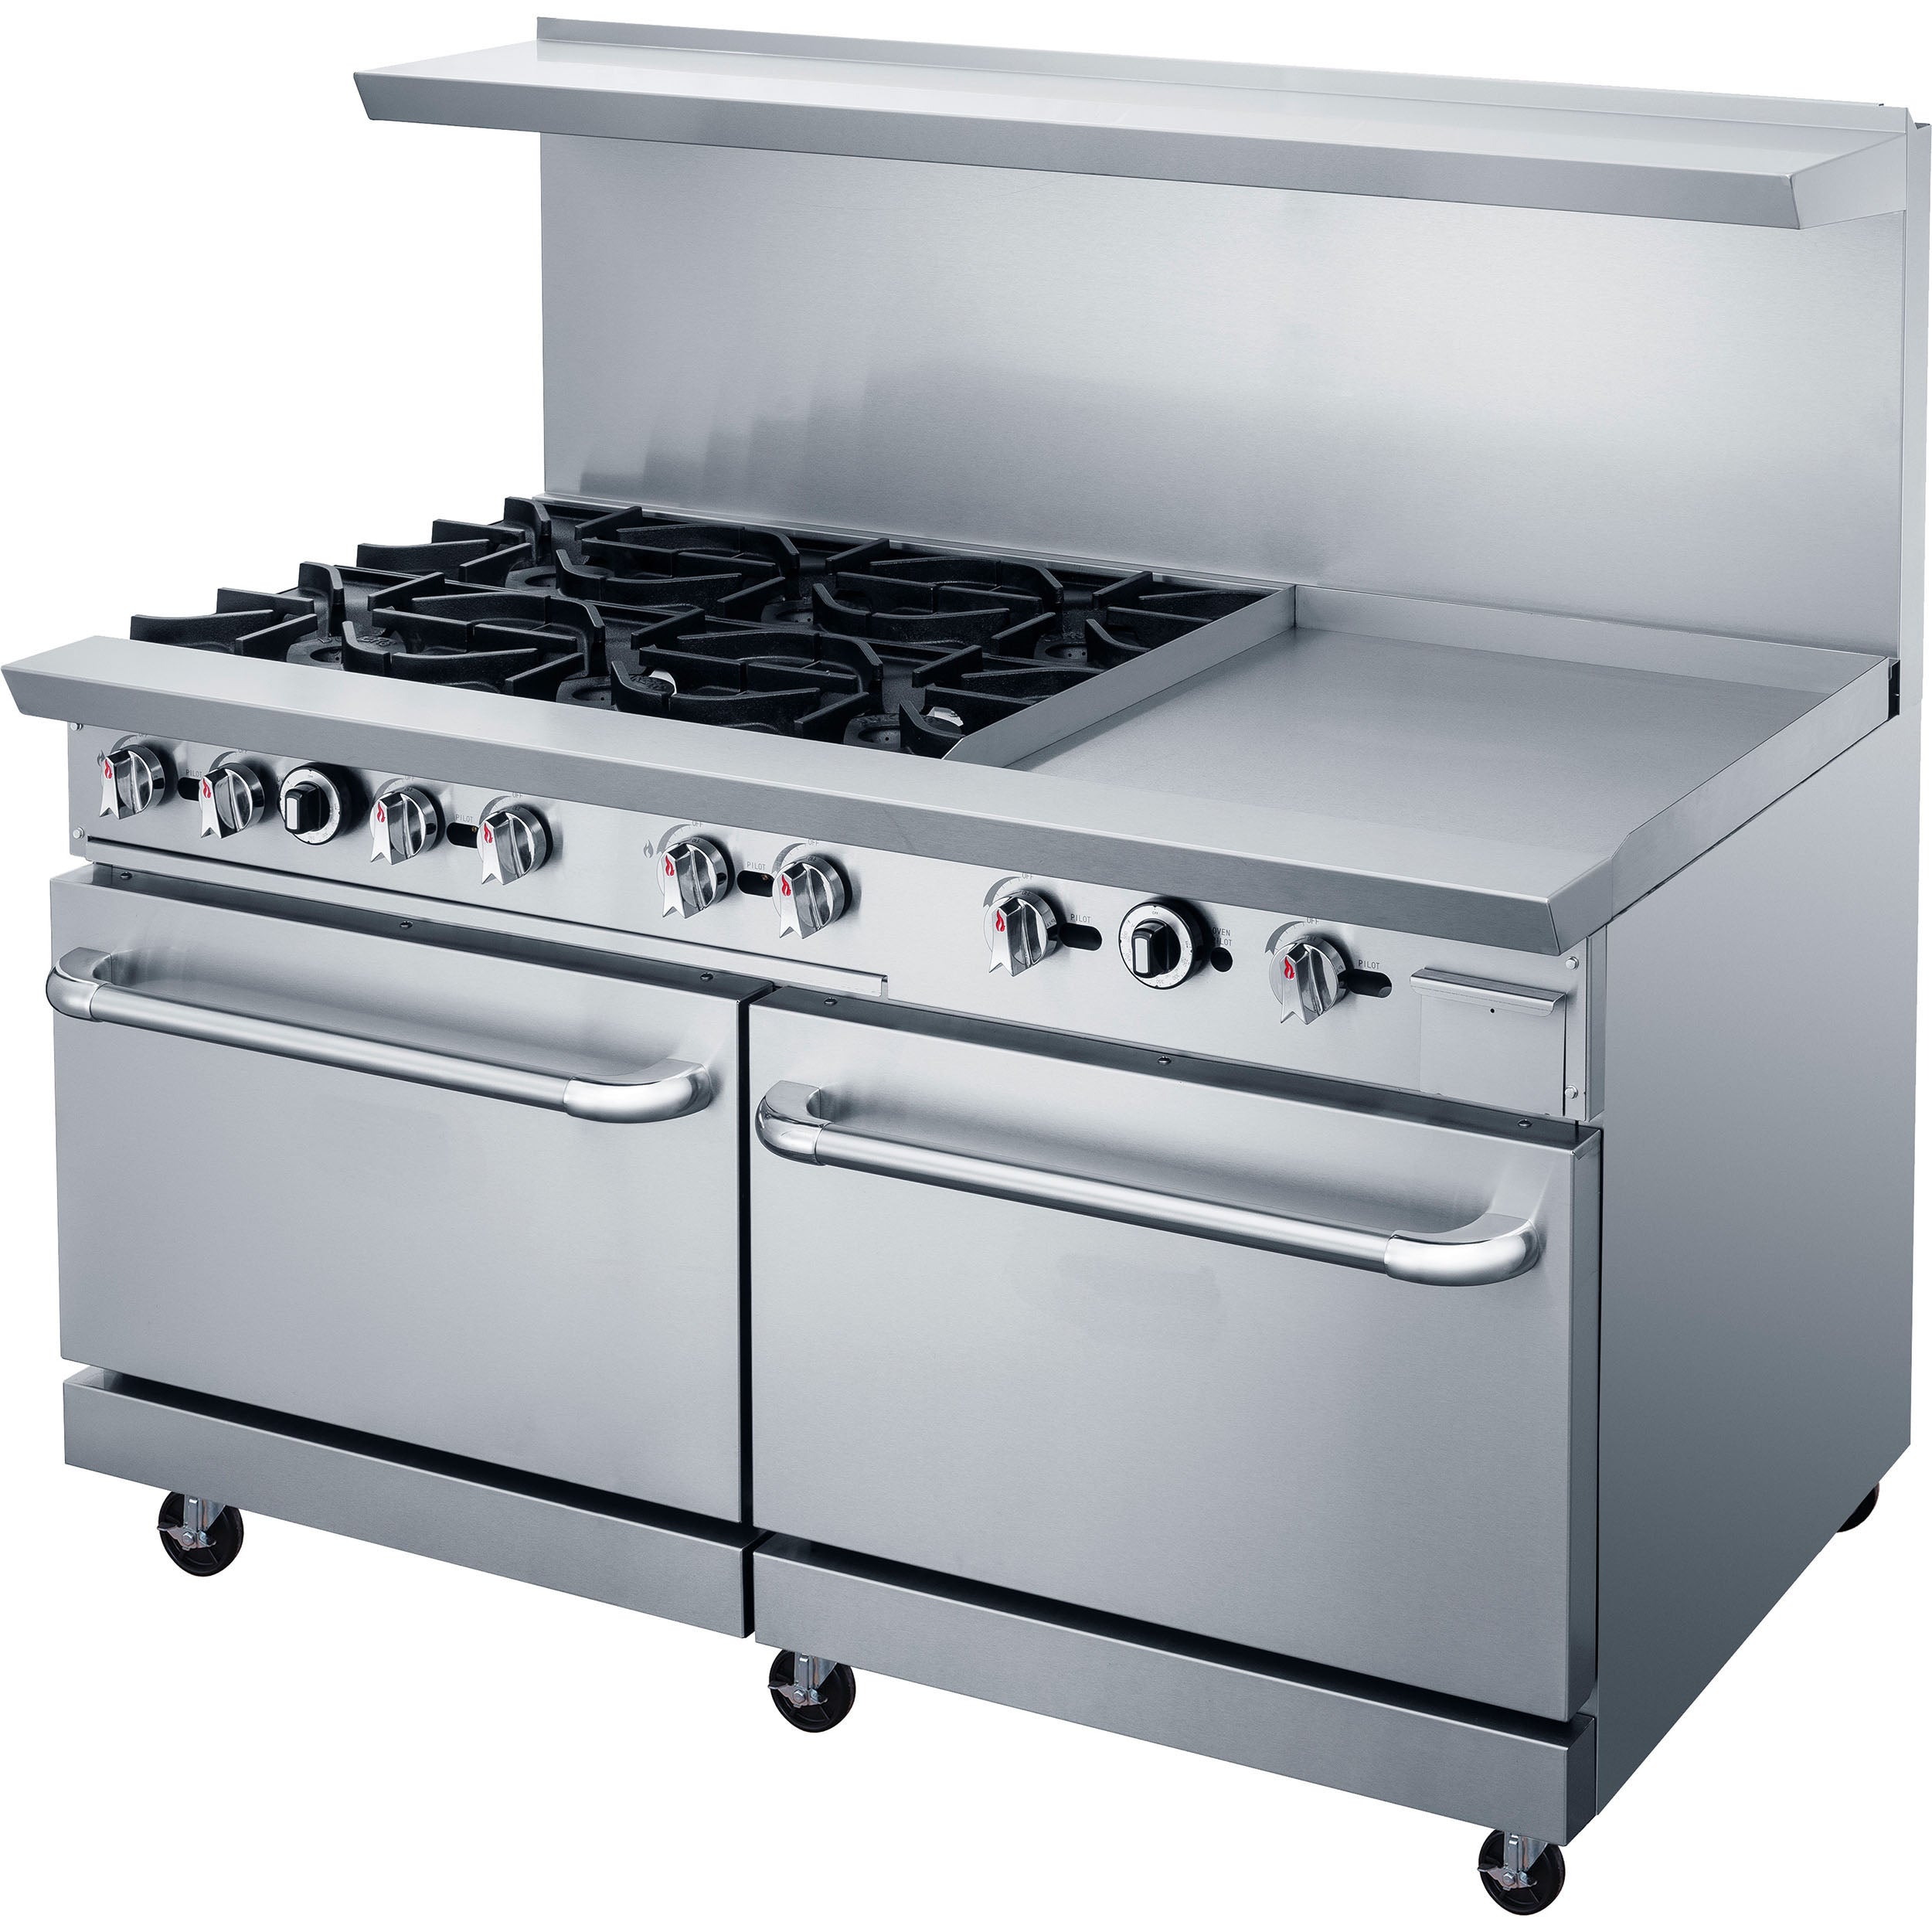 Chef AAA - TCR60-6B24GM-NG, Commercial 60" Oven Range Six Open Burner with 24" Griddle Natural Gas